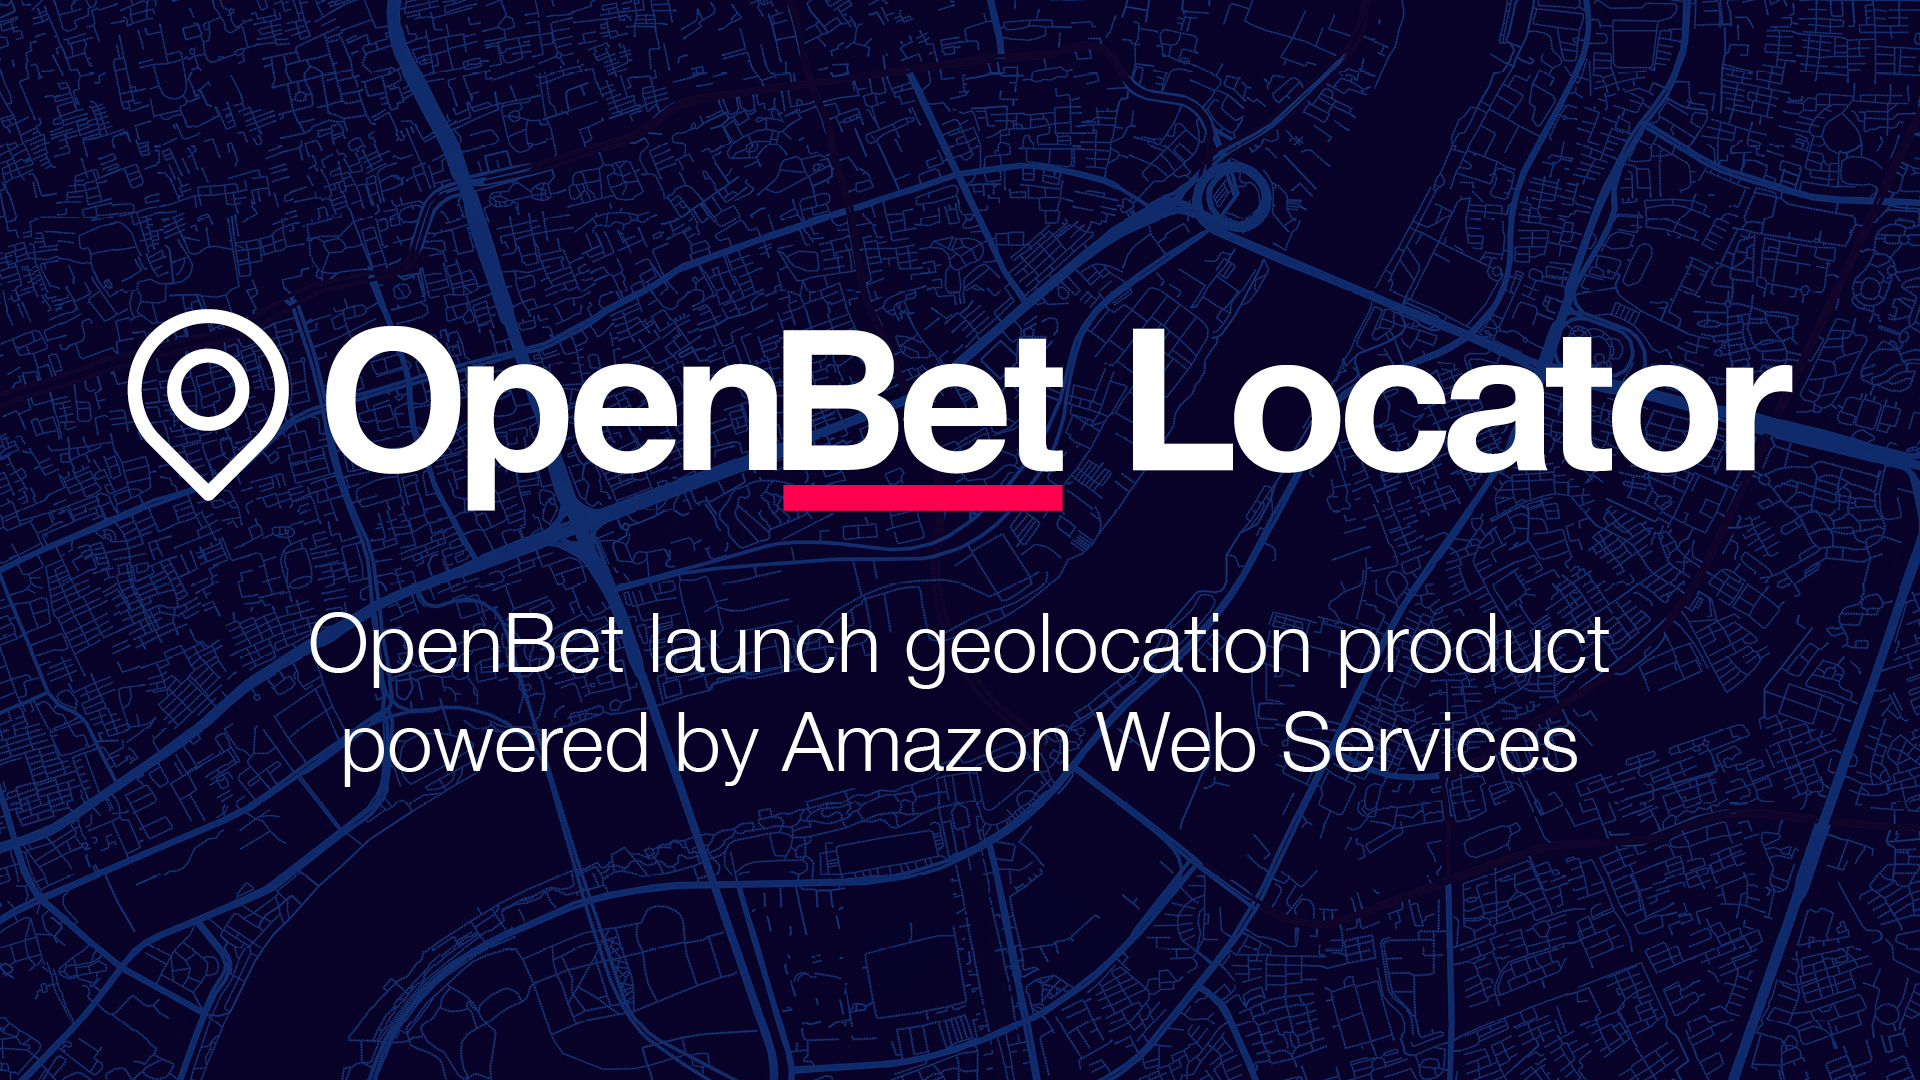 OpenBet Locator™ provides a highly flexible, low latency and scalable alternative for global betting and gaming marketplace